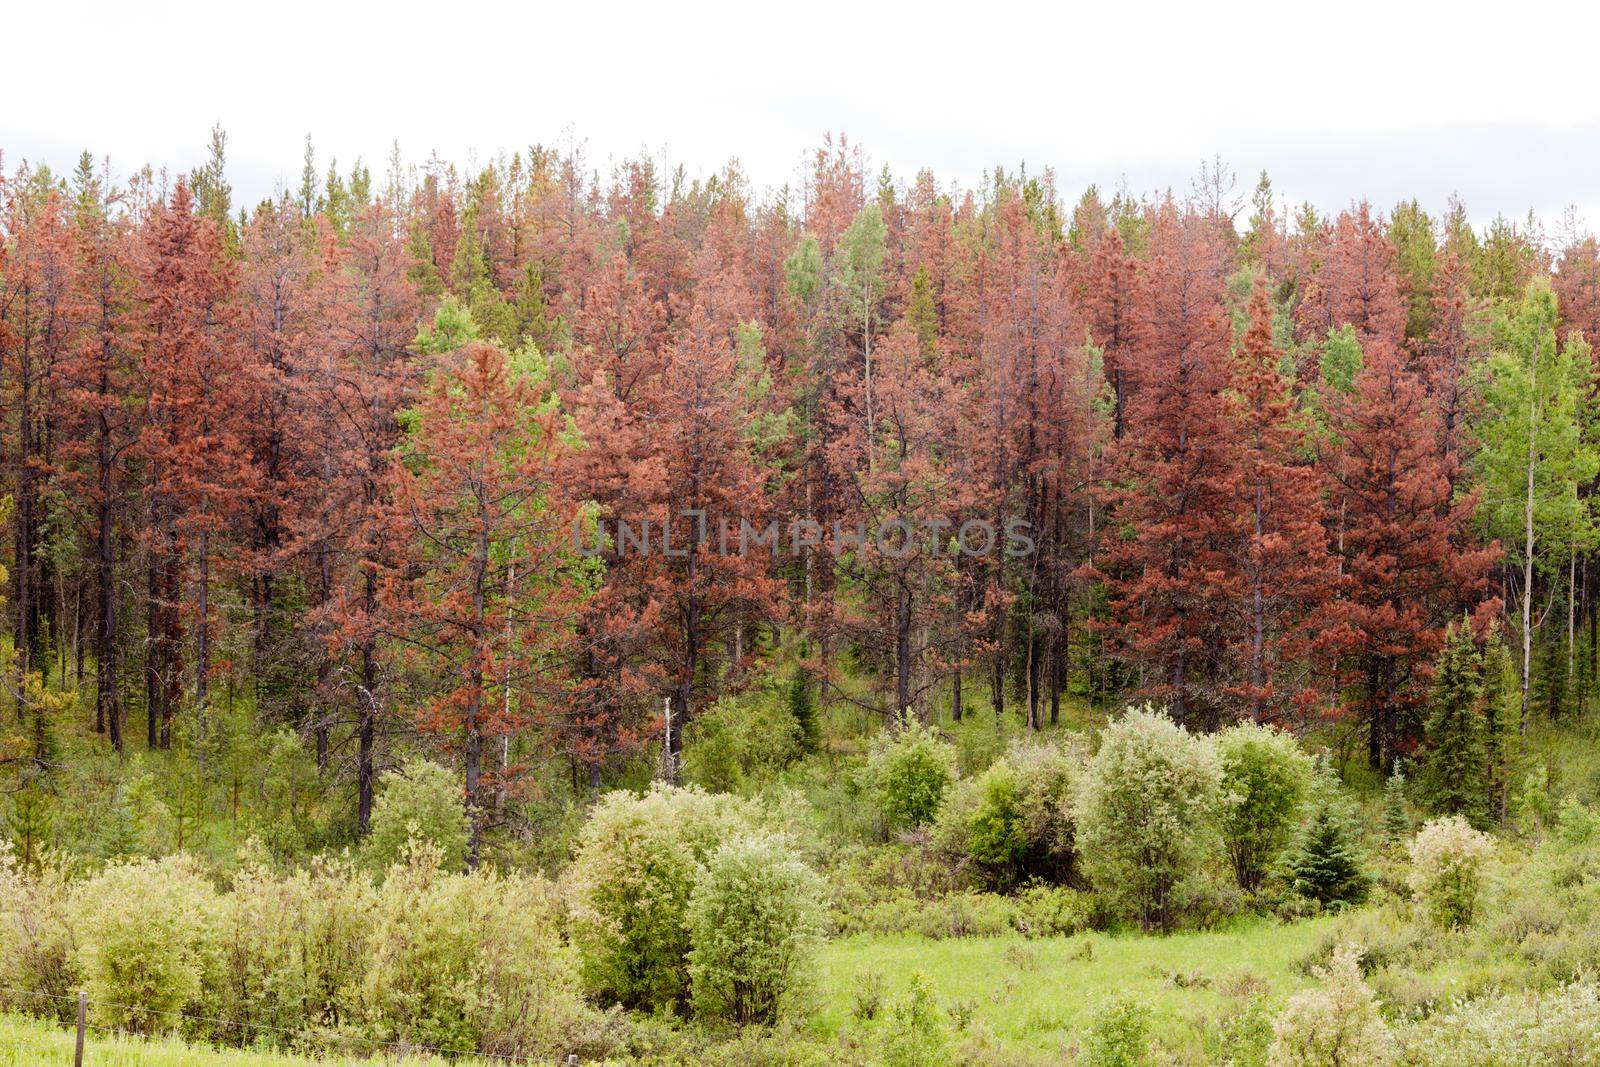 Mountain Pine Beetle killed pine forest by PiLens